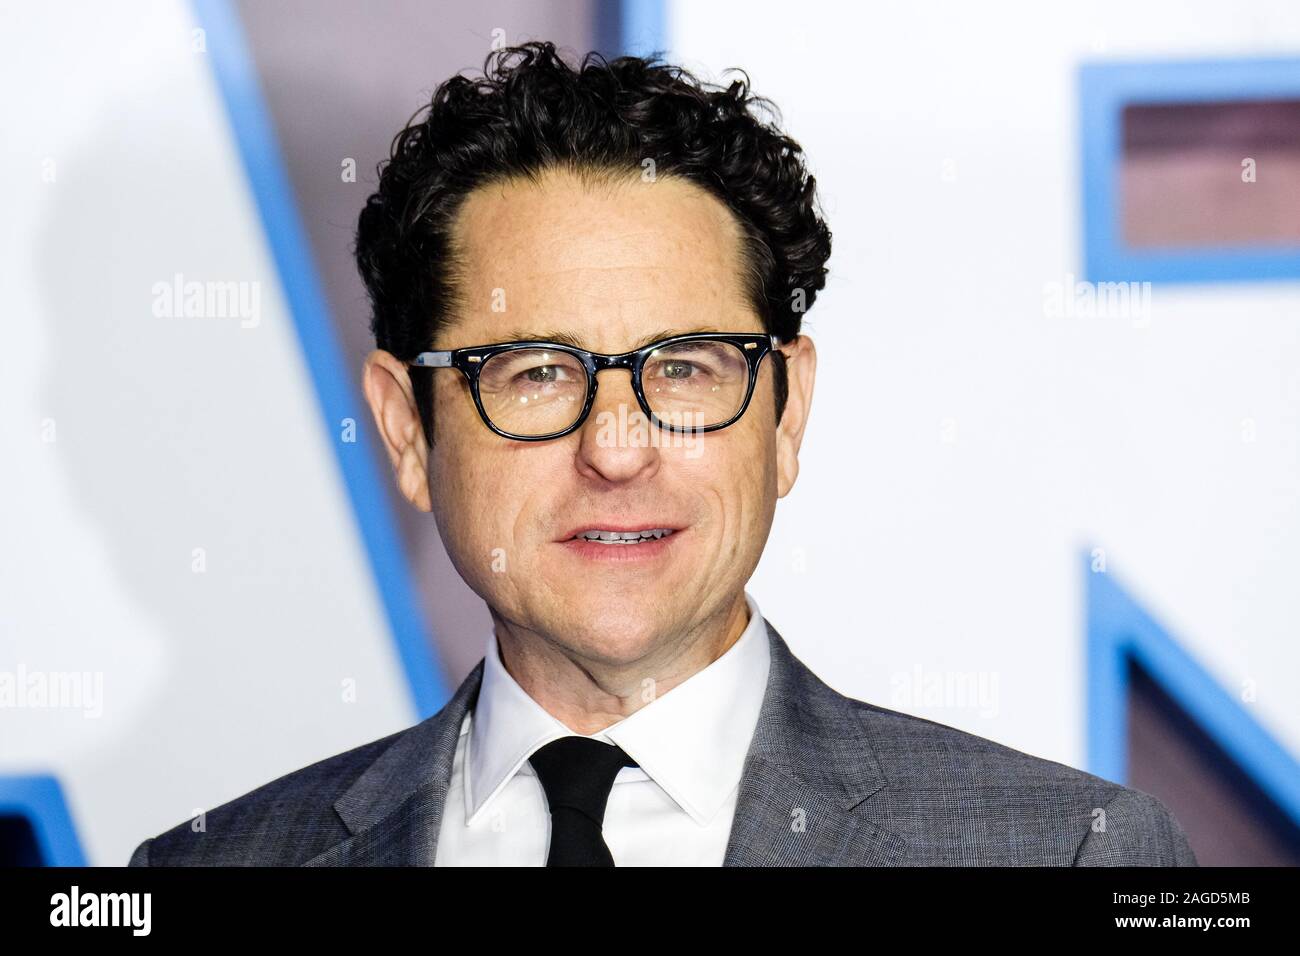 Cineworld Leicester Square, London, UK. 18 December 2019.  J.J. Abrams, Director Producer poses at European Premier of Star Wars: The Rise of Skywalker. . Picture by Julie Edwards./Alamy Live News Stock Photo